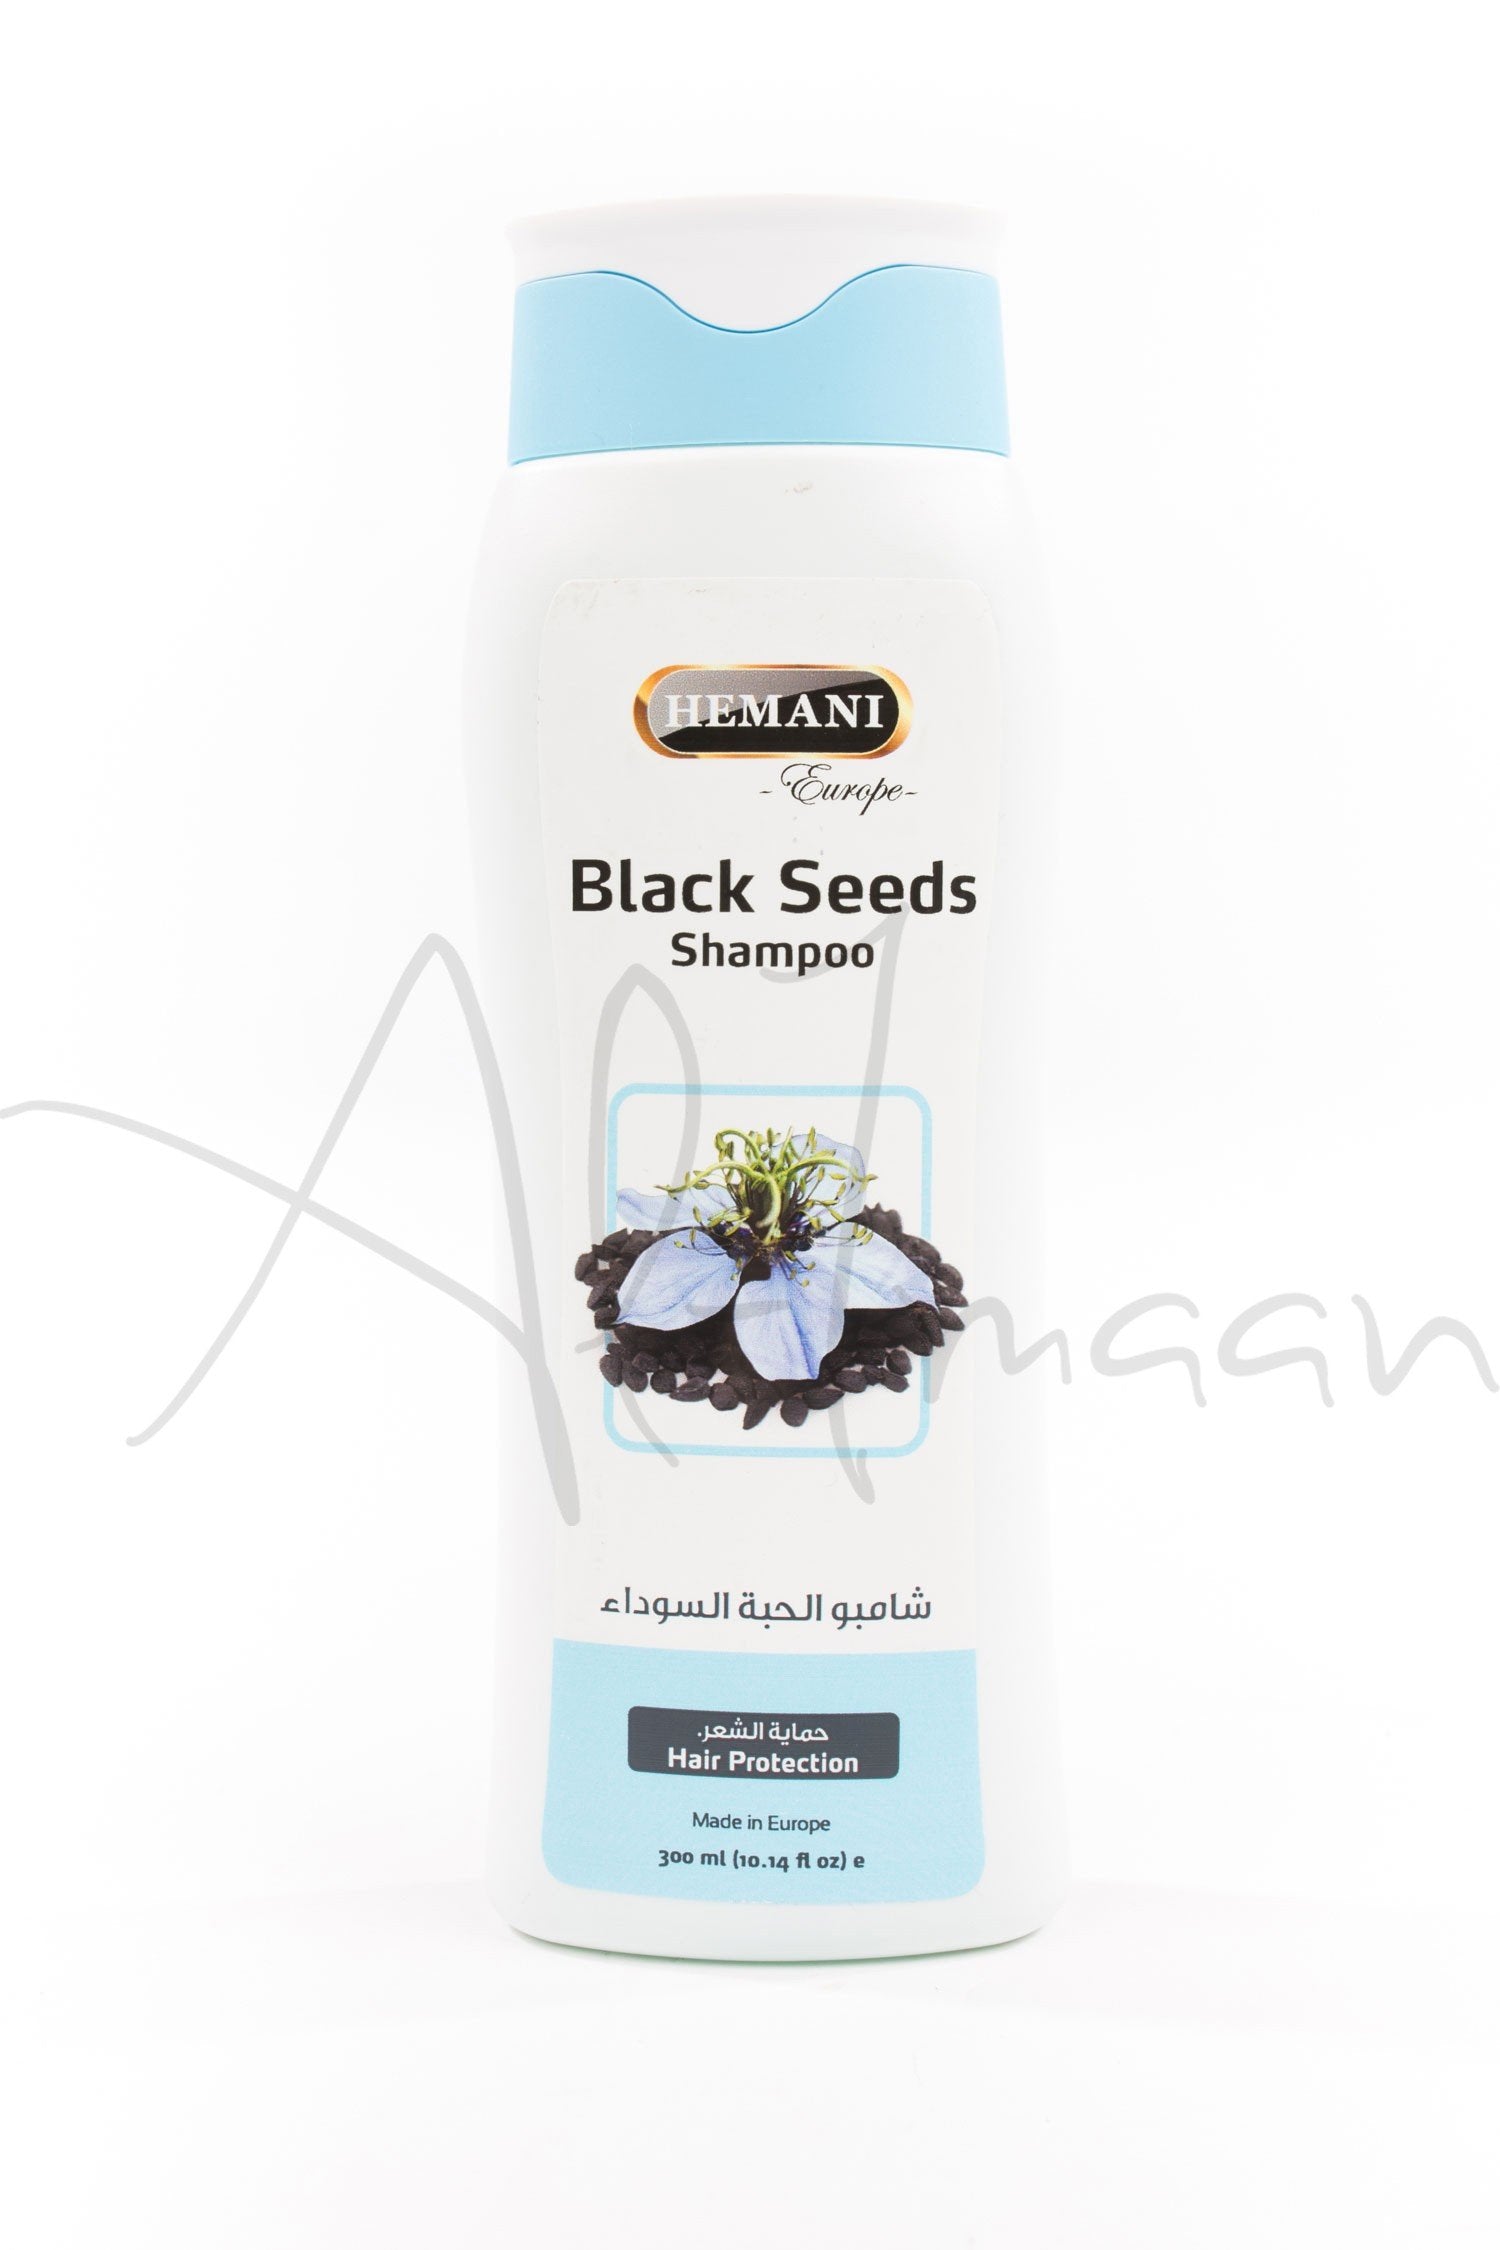 Black Seed Oil Shampoo – The Amazing Benefits For Your Hair